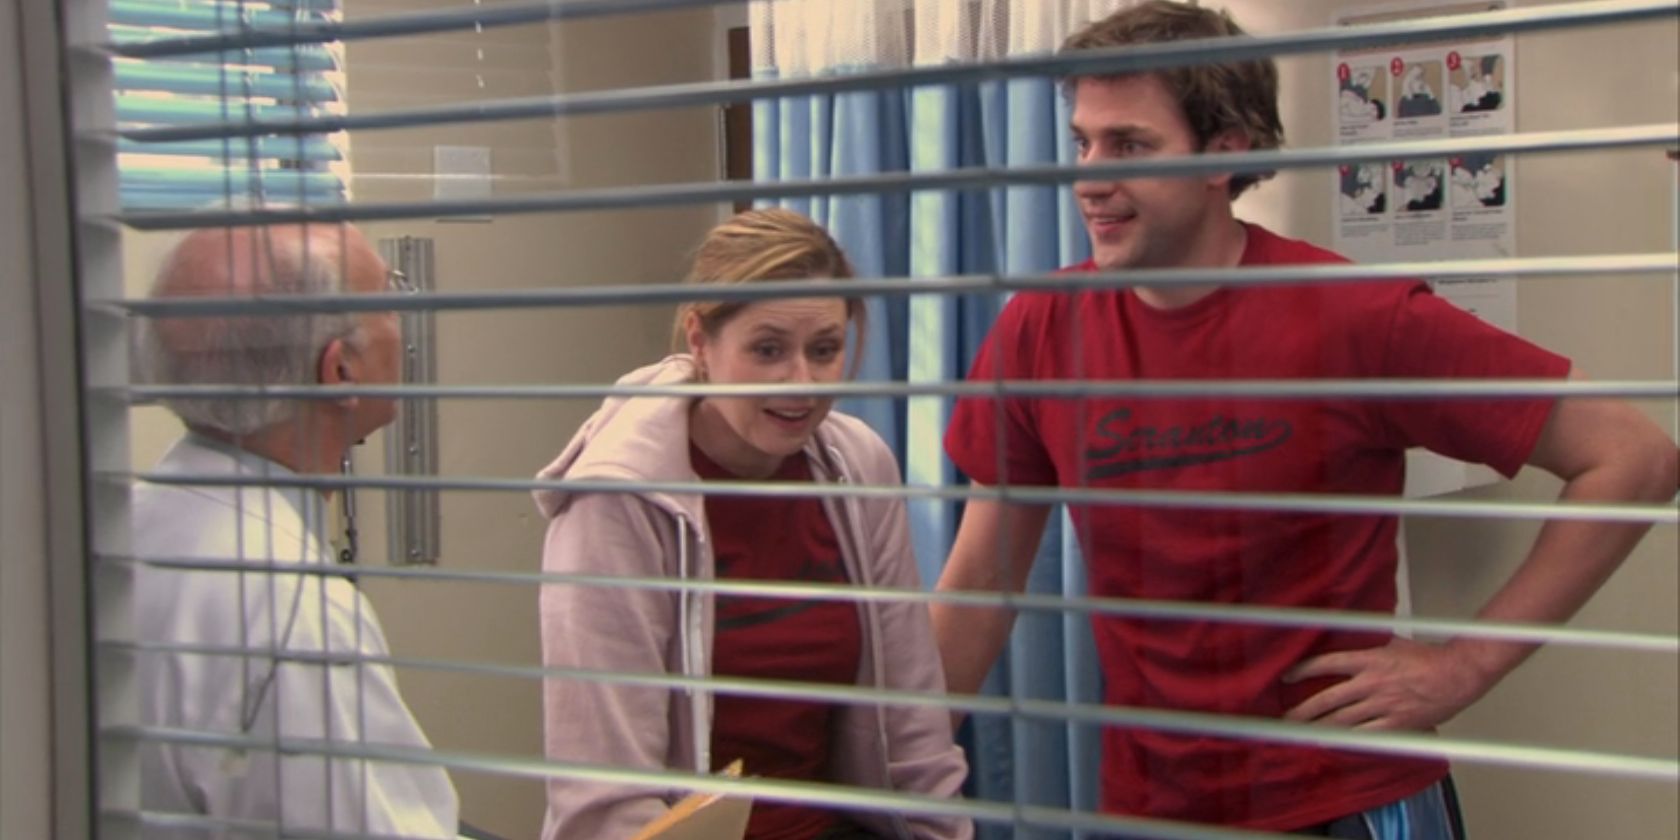 Jenna Fischer and John Krasinski as Jim and Pam find out they're pregnant in The Office